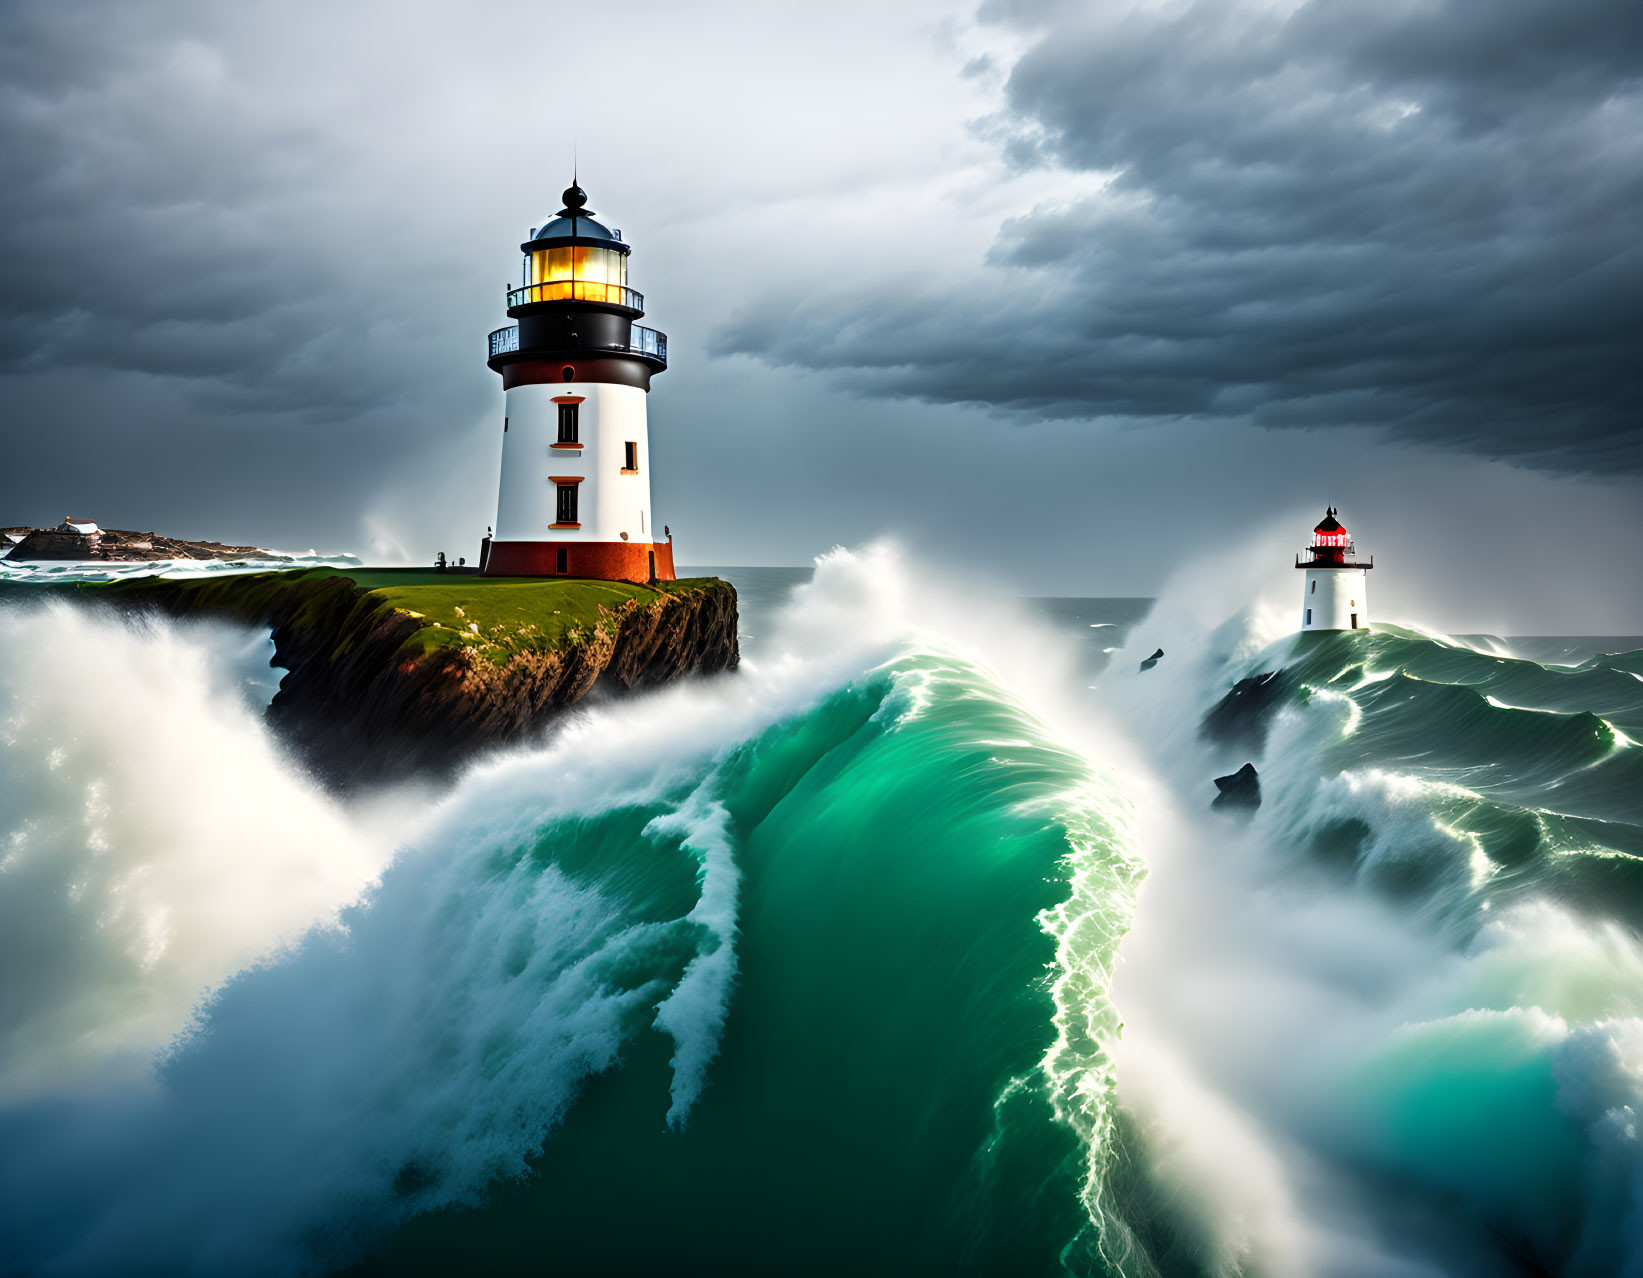 Stormy Seascape with Towering Waves and Lighthouse on Rugged Coastline